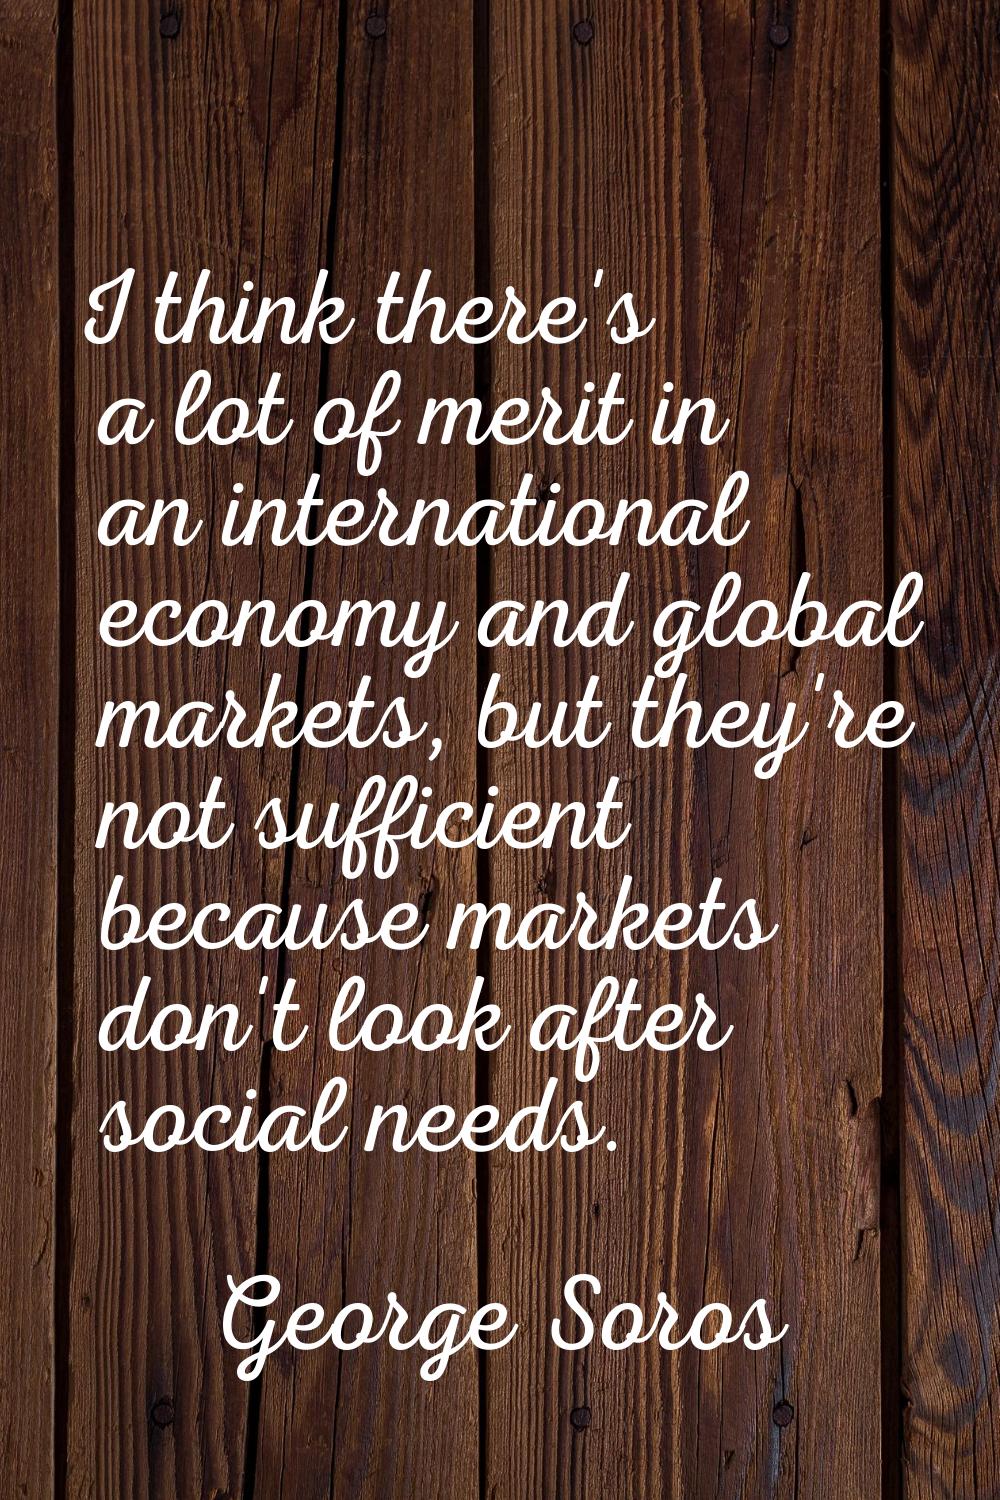 I think there's a lot of merit in an international economy and global markets, but they're not suff